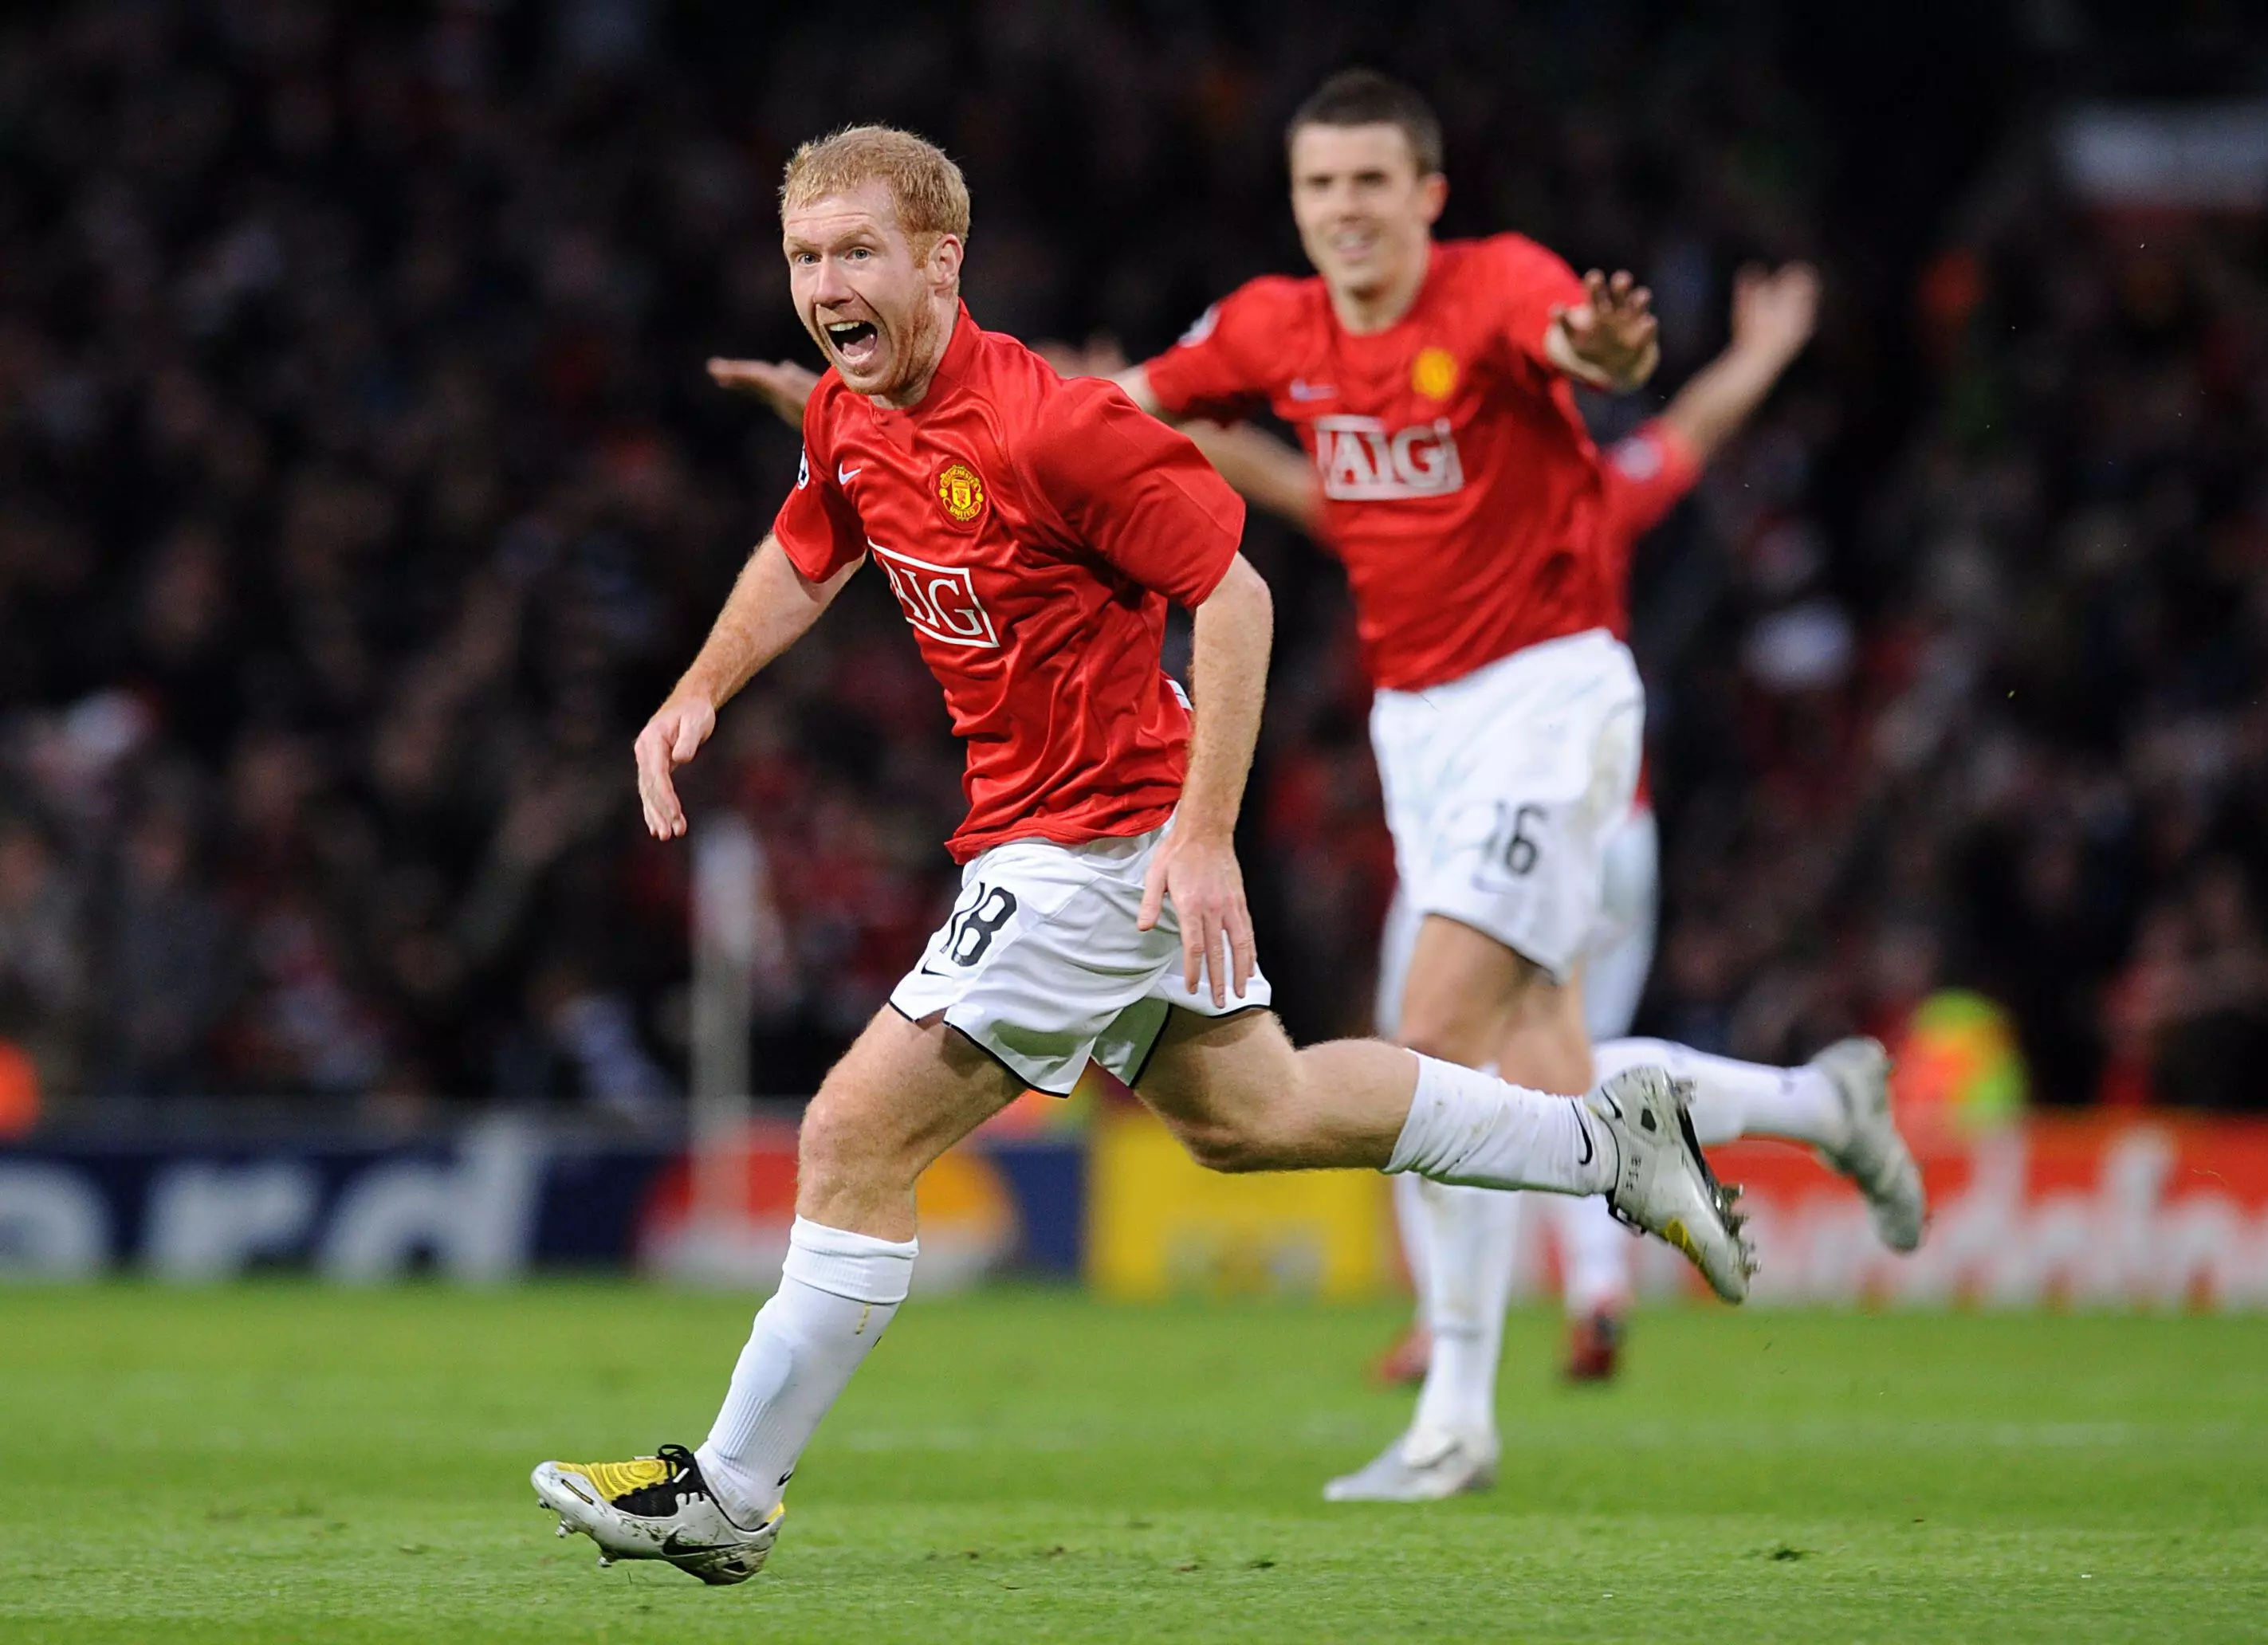 Scholes playing for Manchester United in 2008.